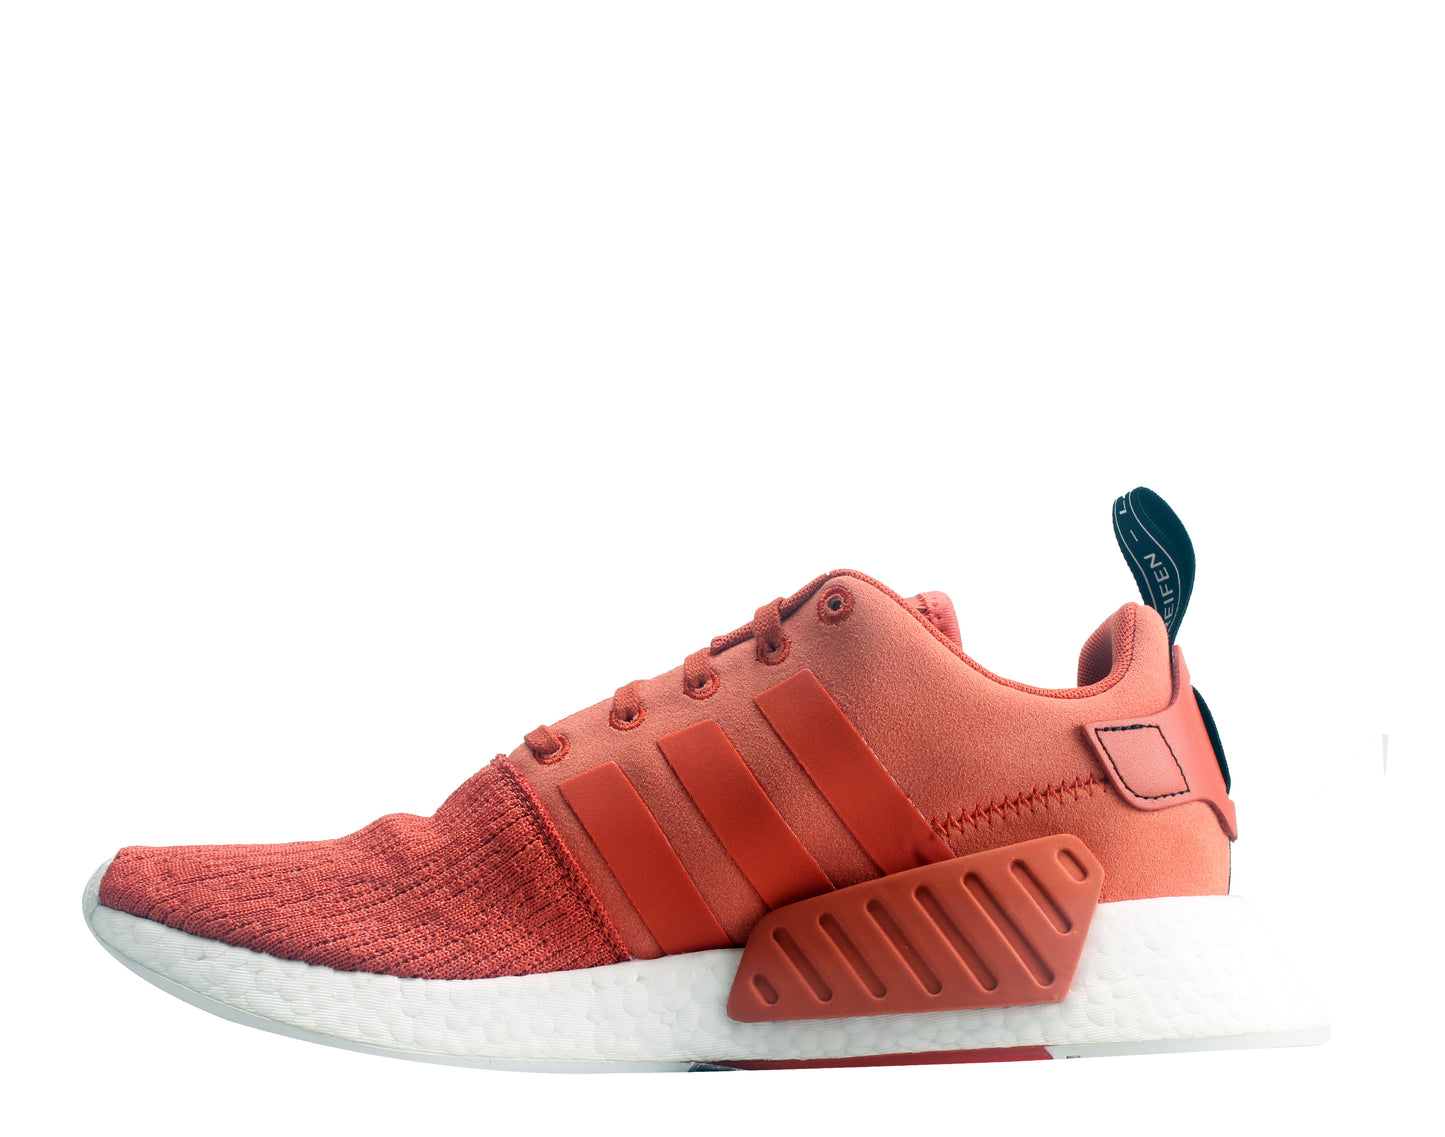 Adidas NMD_R2 Men's Running Shoes